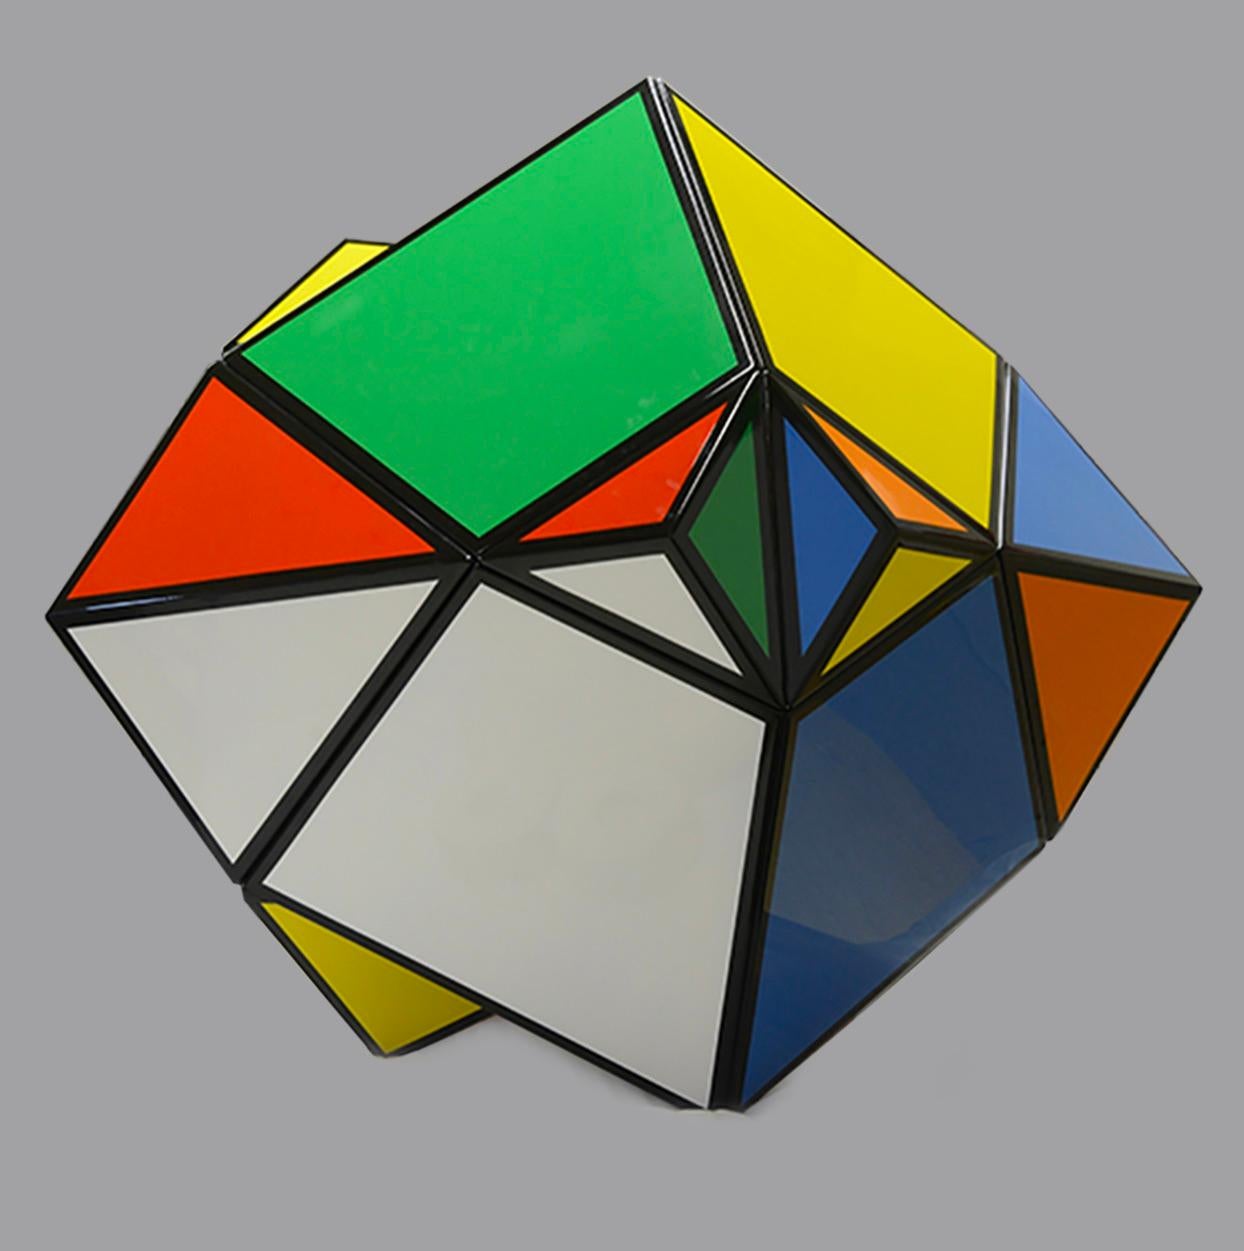 Magic Cube 3.1.1 - Sculpture by Jannis Markopoulos